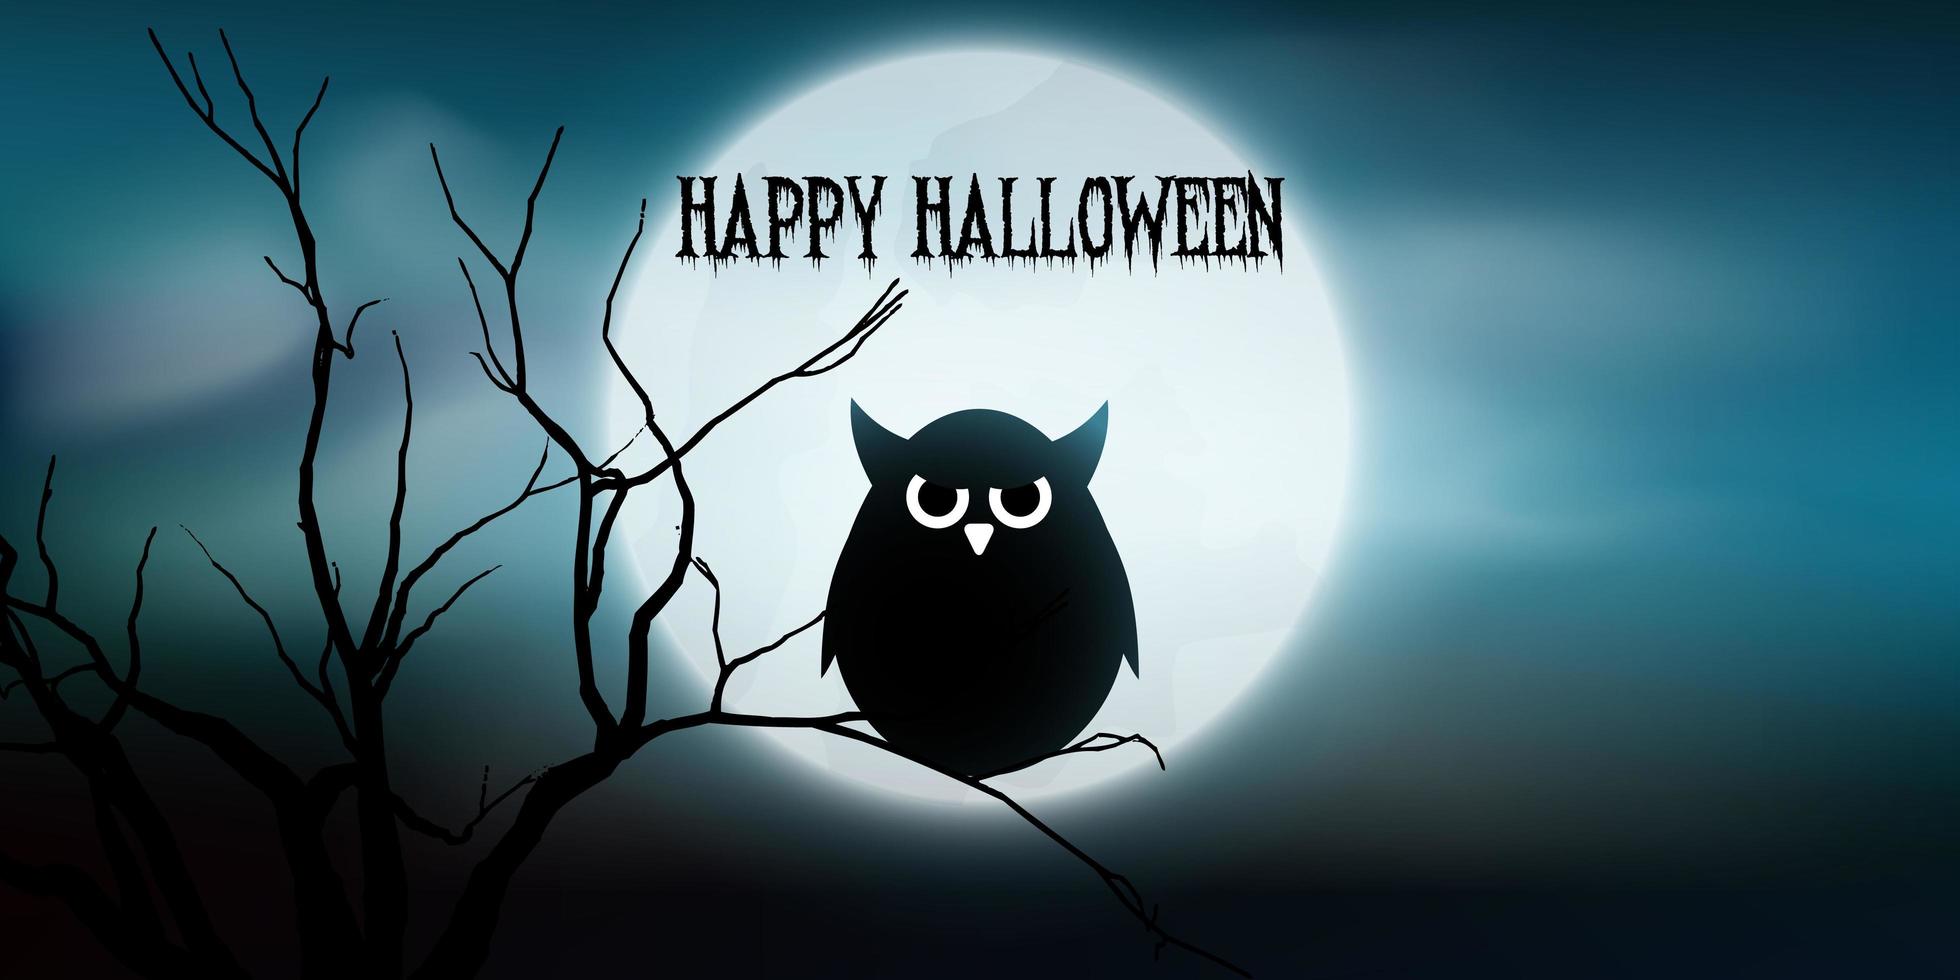 Halloween banner with owl and tree against moon vector